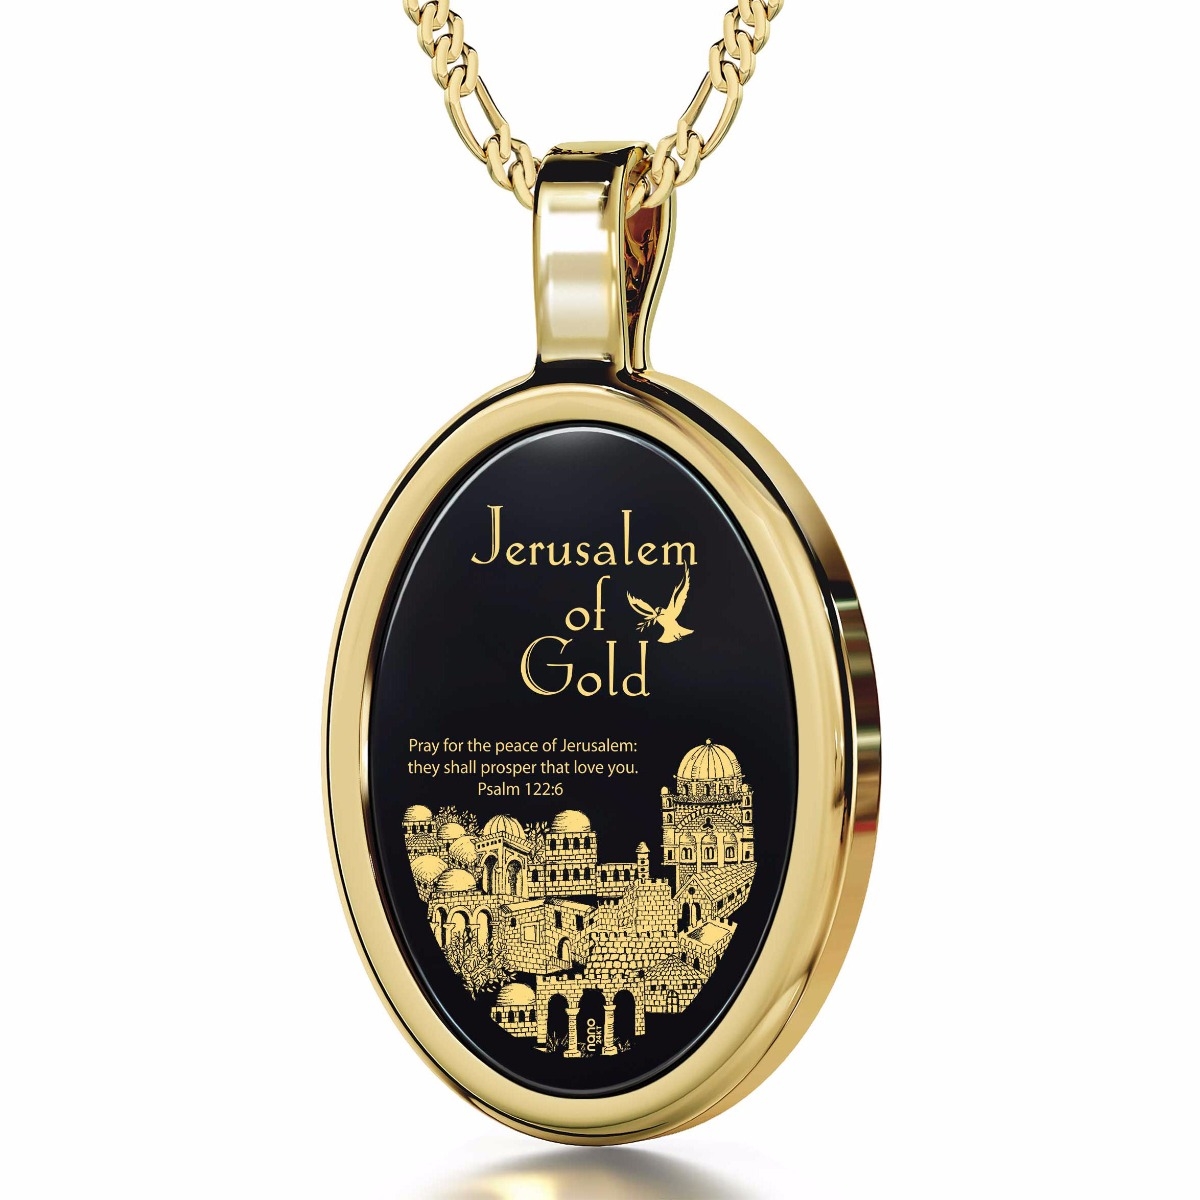 Jerusalem of Gold 24K Gold Plated and Onyx Necklace Micro-Inscribed with 24K Gold  - 1